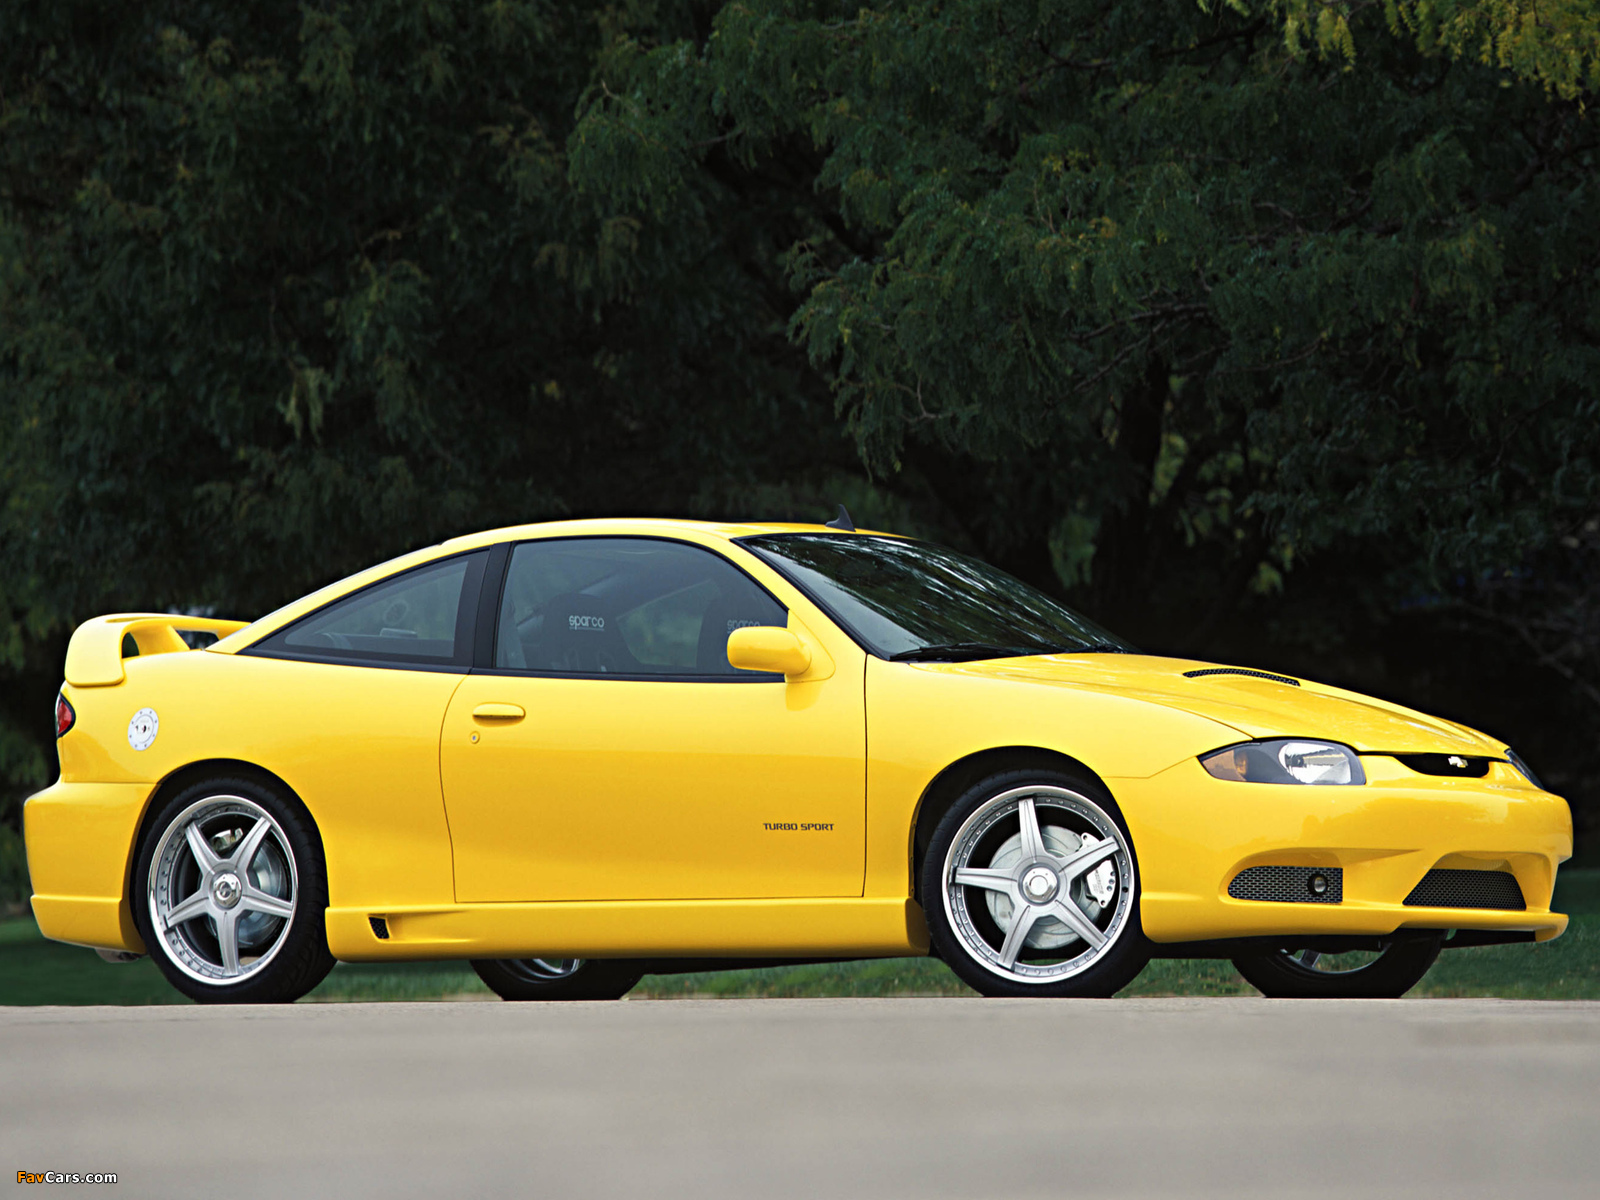 Images of Chevrolet Cavalier 2.2 Turbo Sport Coupe Concept 2002 (1600 x 1200)